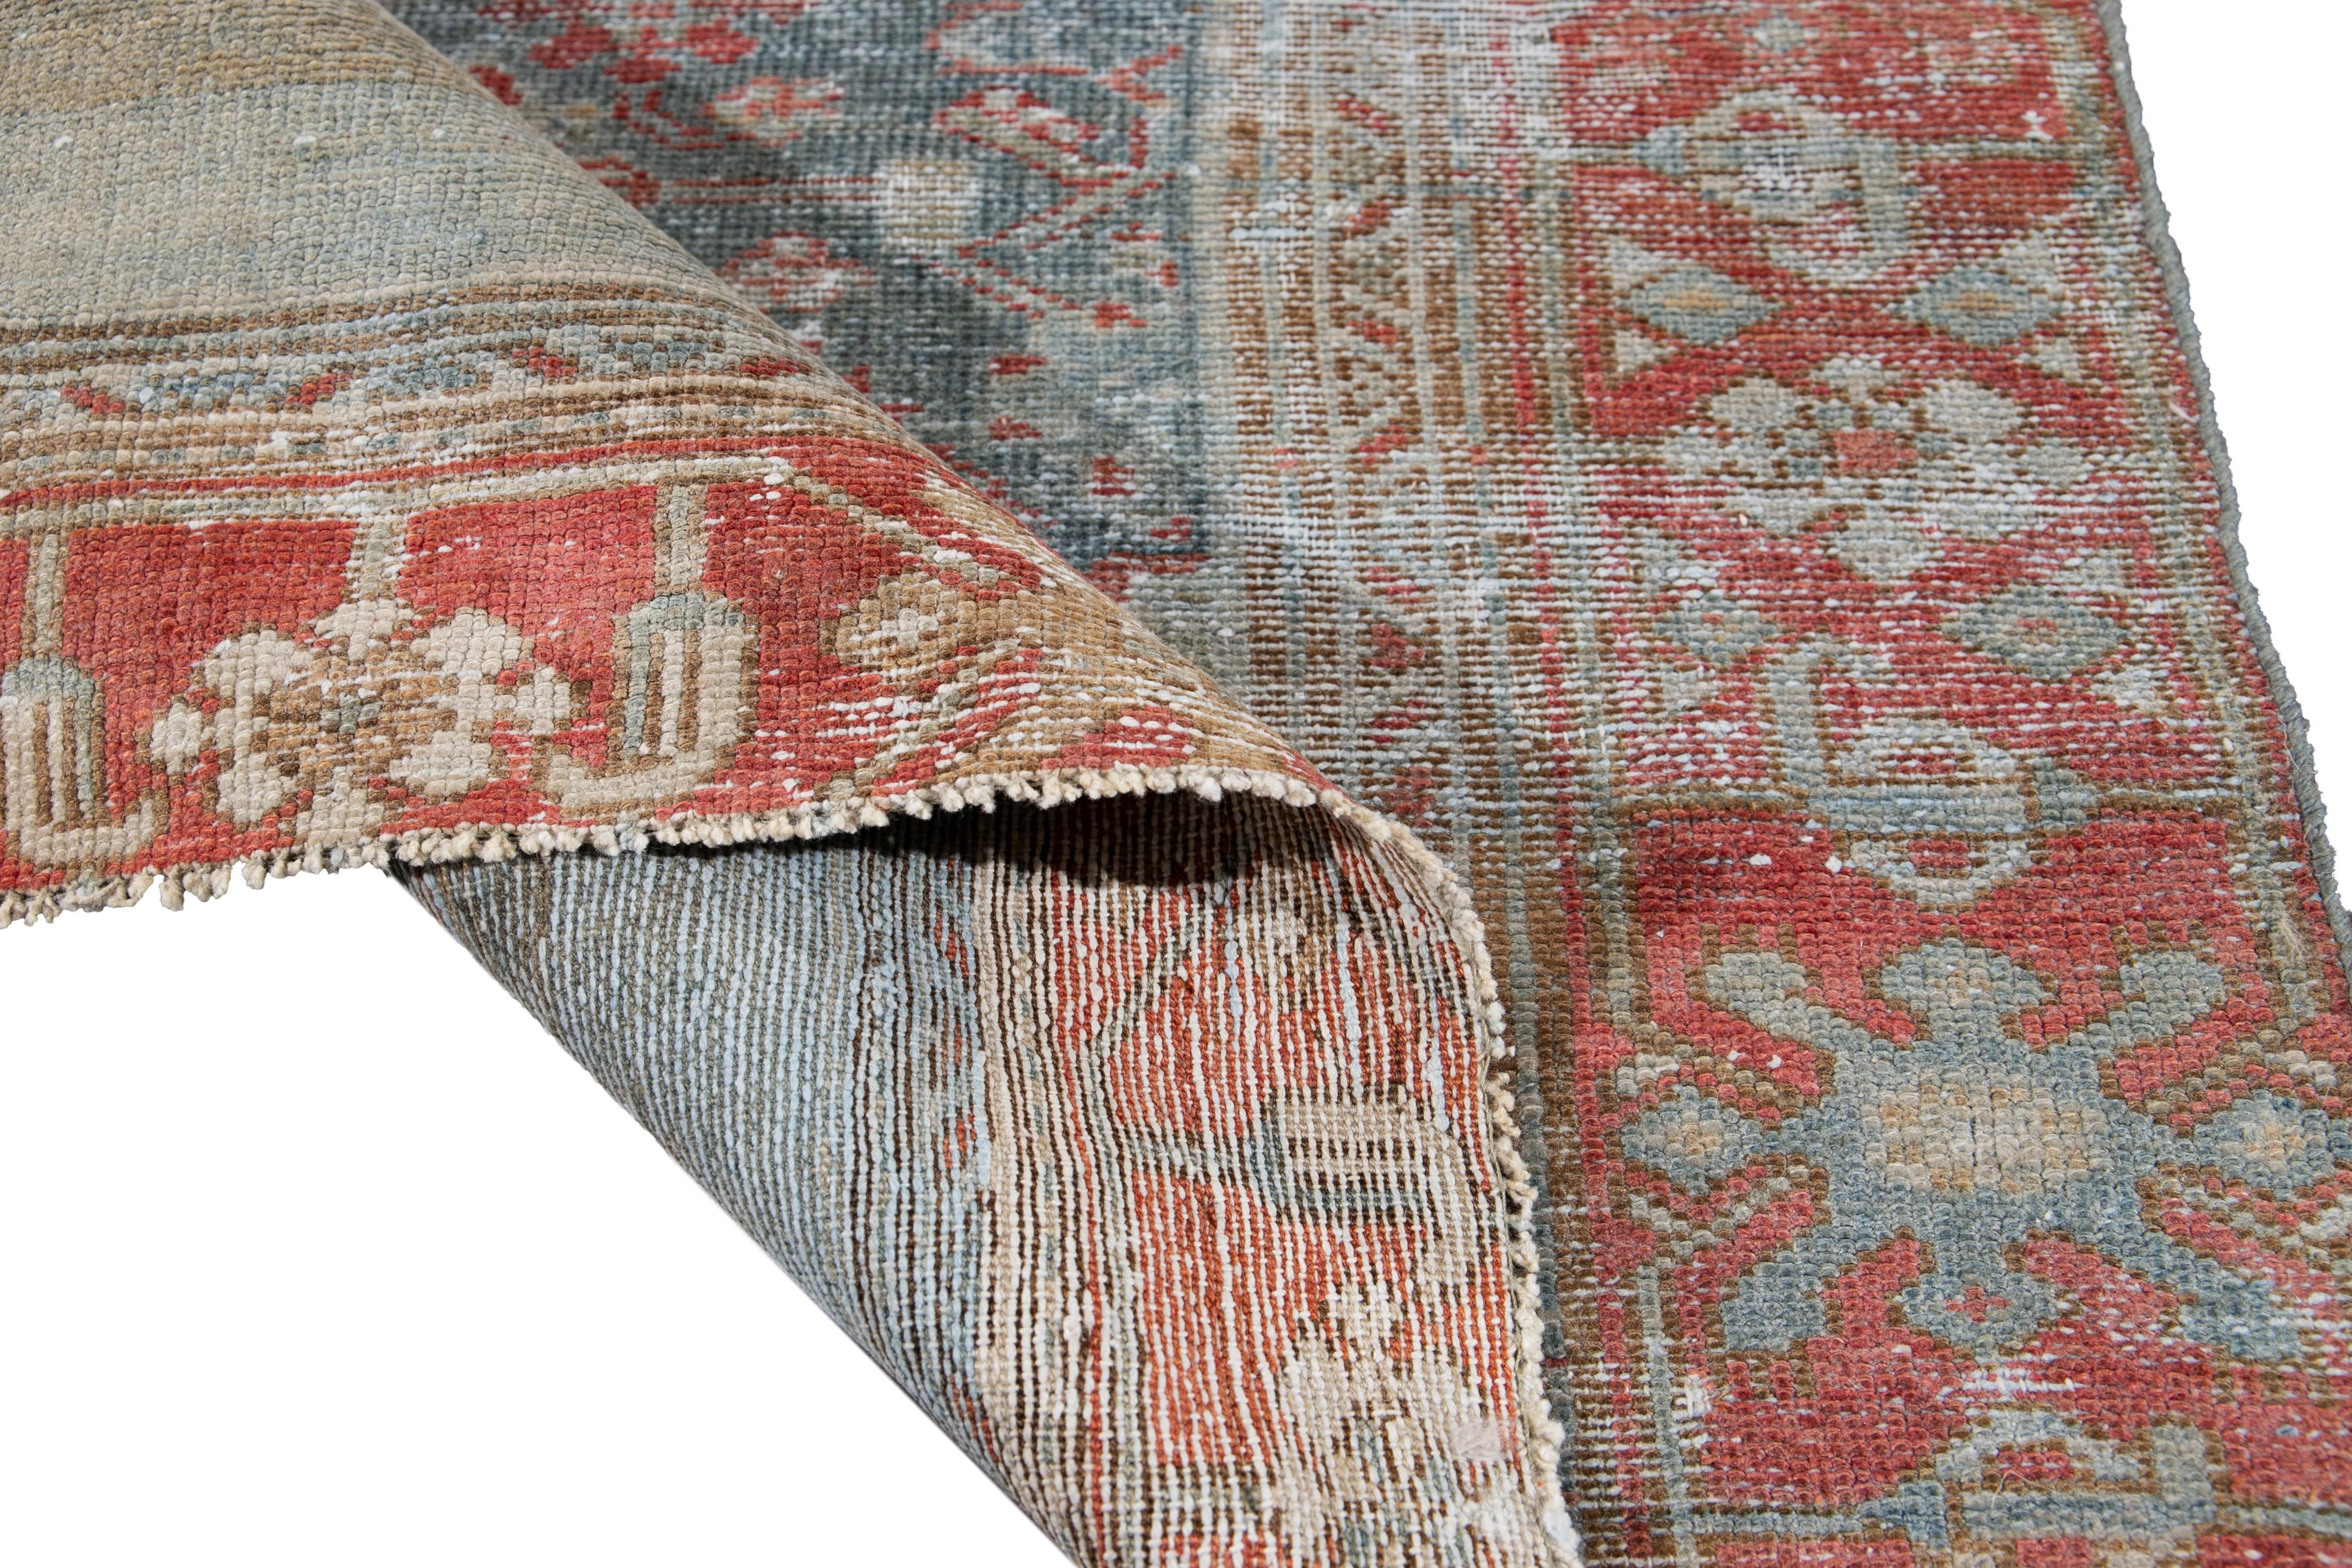 Beautiful vintage Persian Malayer hand knotted wool runner with a blue field. This Malayer runner has accents of red and brown in an all-over distressed geometric Botanical design.

This rug measures: 3'1